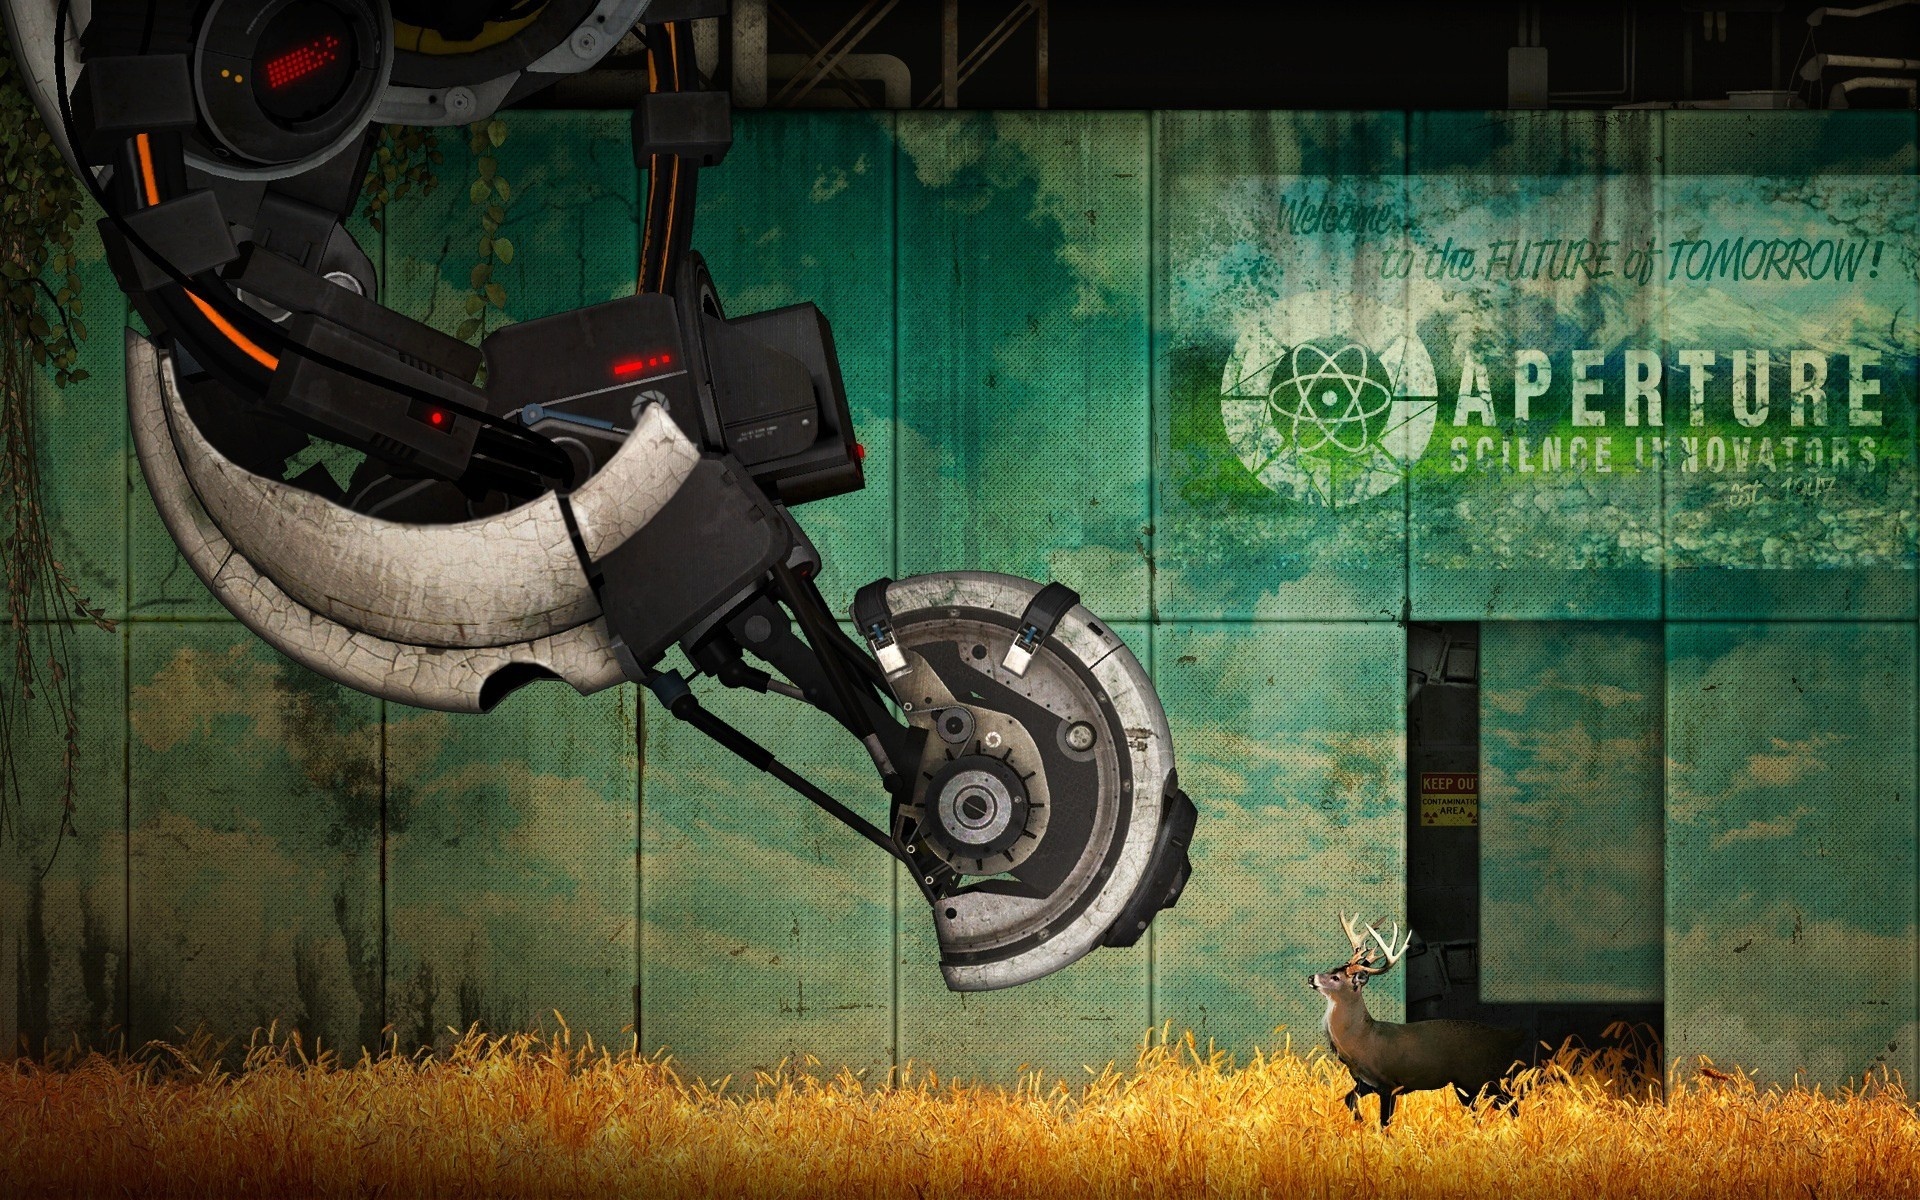 Glados Portal 2 Deer Openness Innovative Science